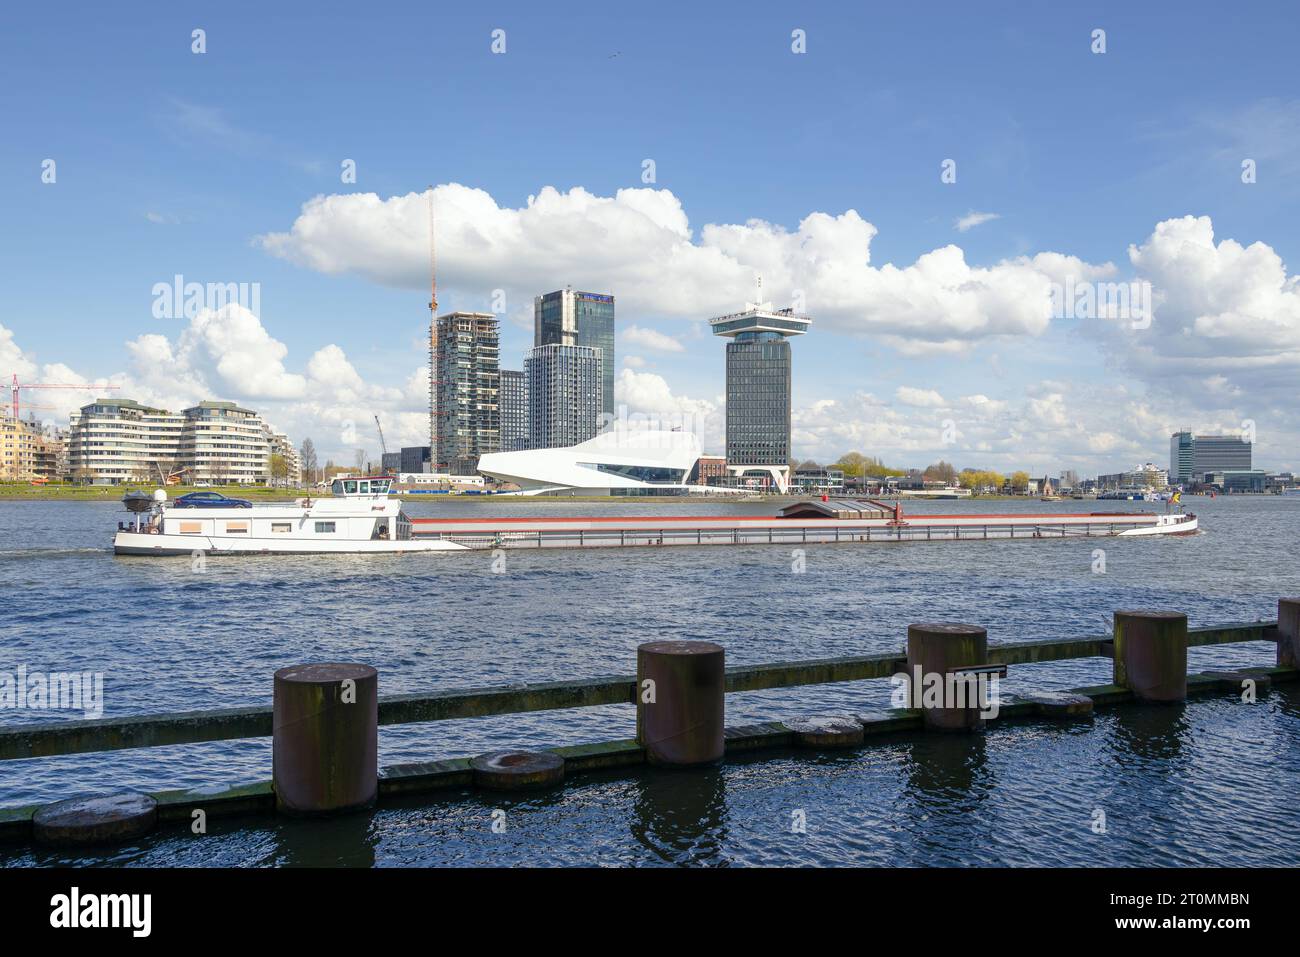 Amsterdam, Netherlands - EYE Filmmuseum by Delugan Meissl Associated Architects, across river Ij with barge Stock Photo